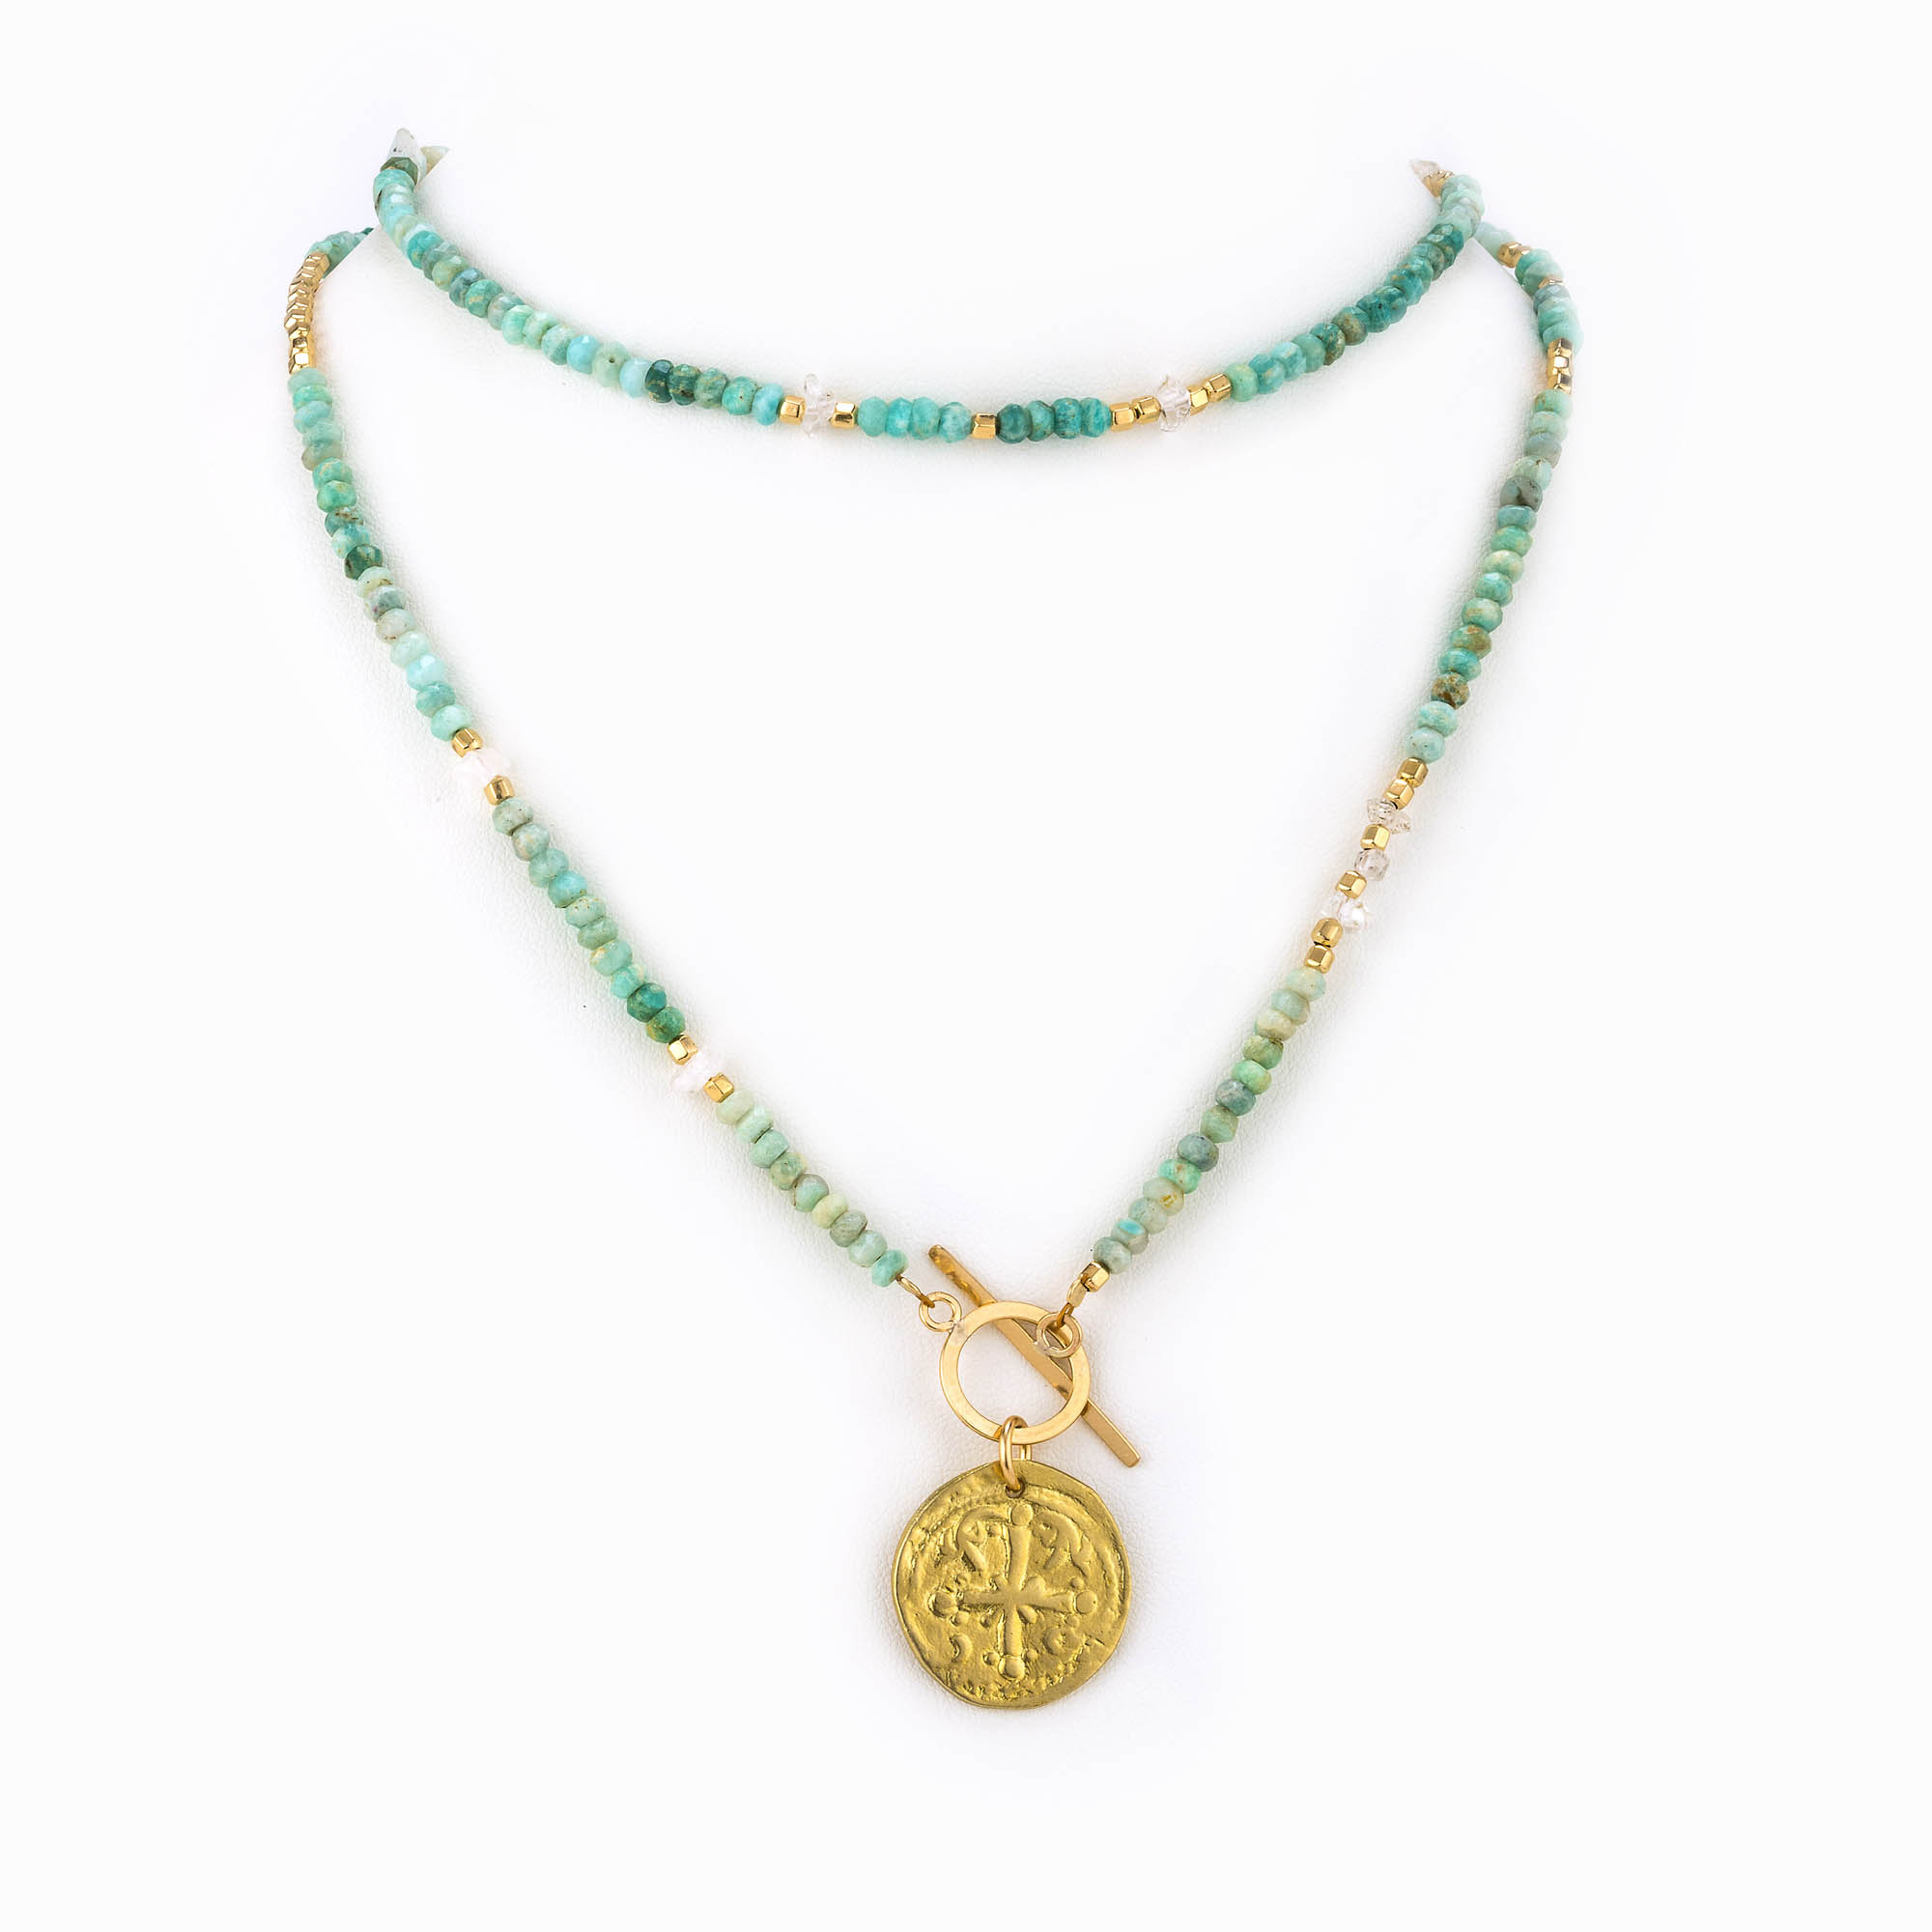 Featured image for “Hopsage Amazonite Necklace”